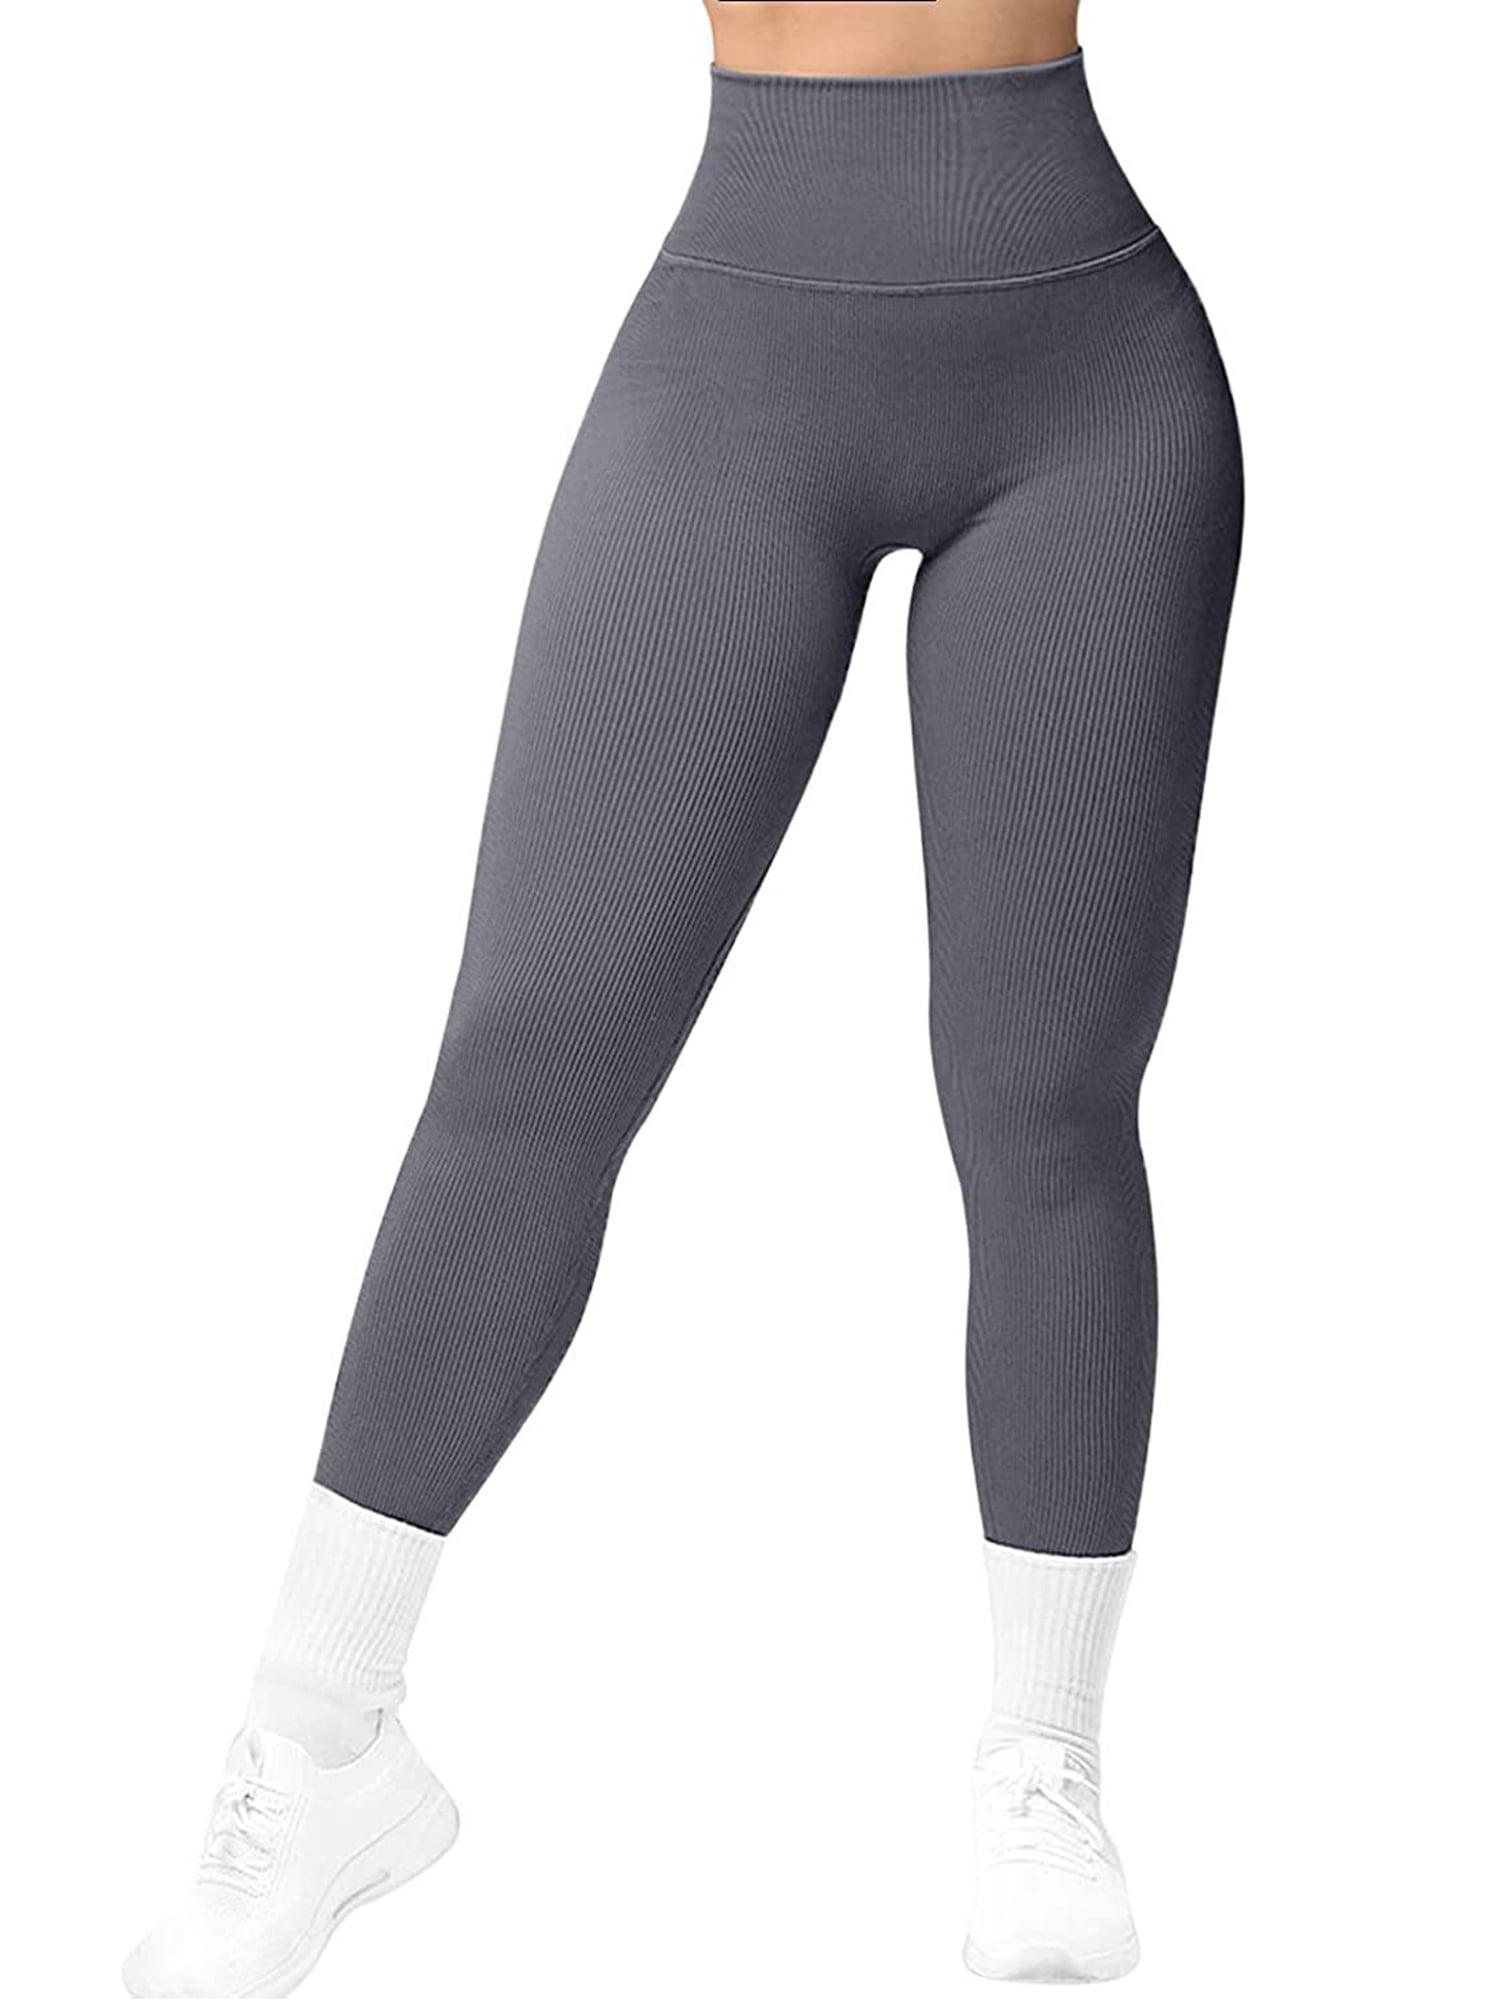 LSFYSZD Women's Solid Color Sports Leggings Non See Through